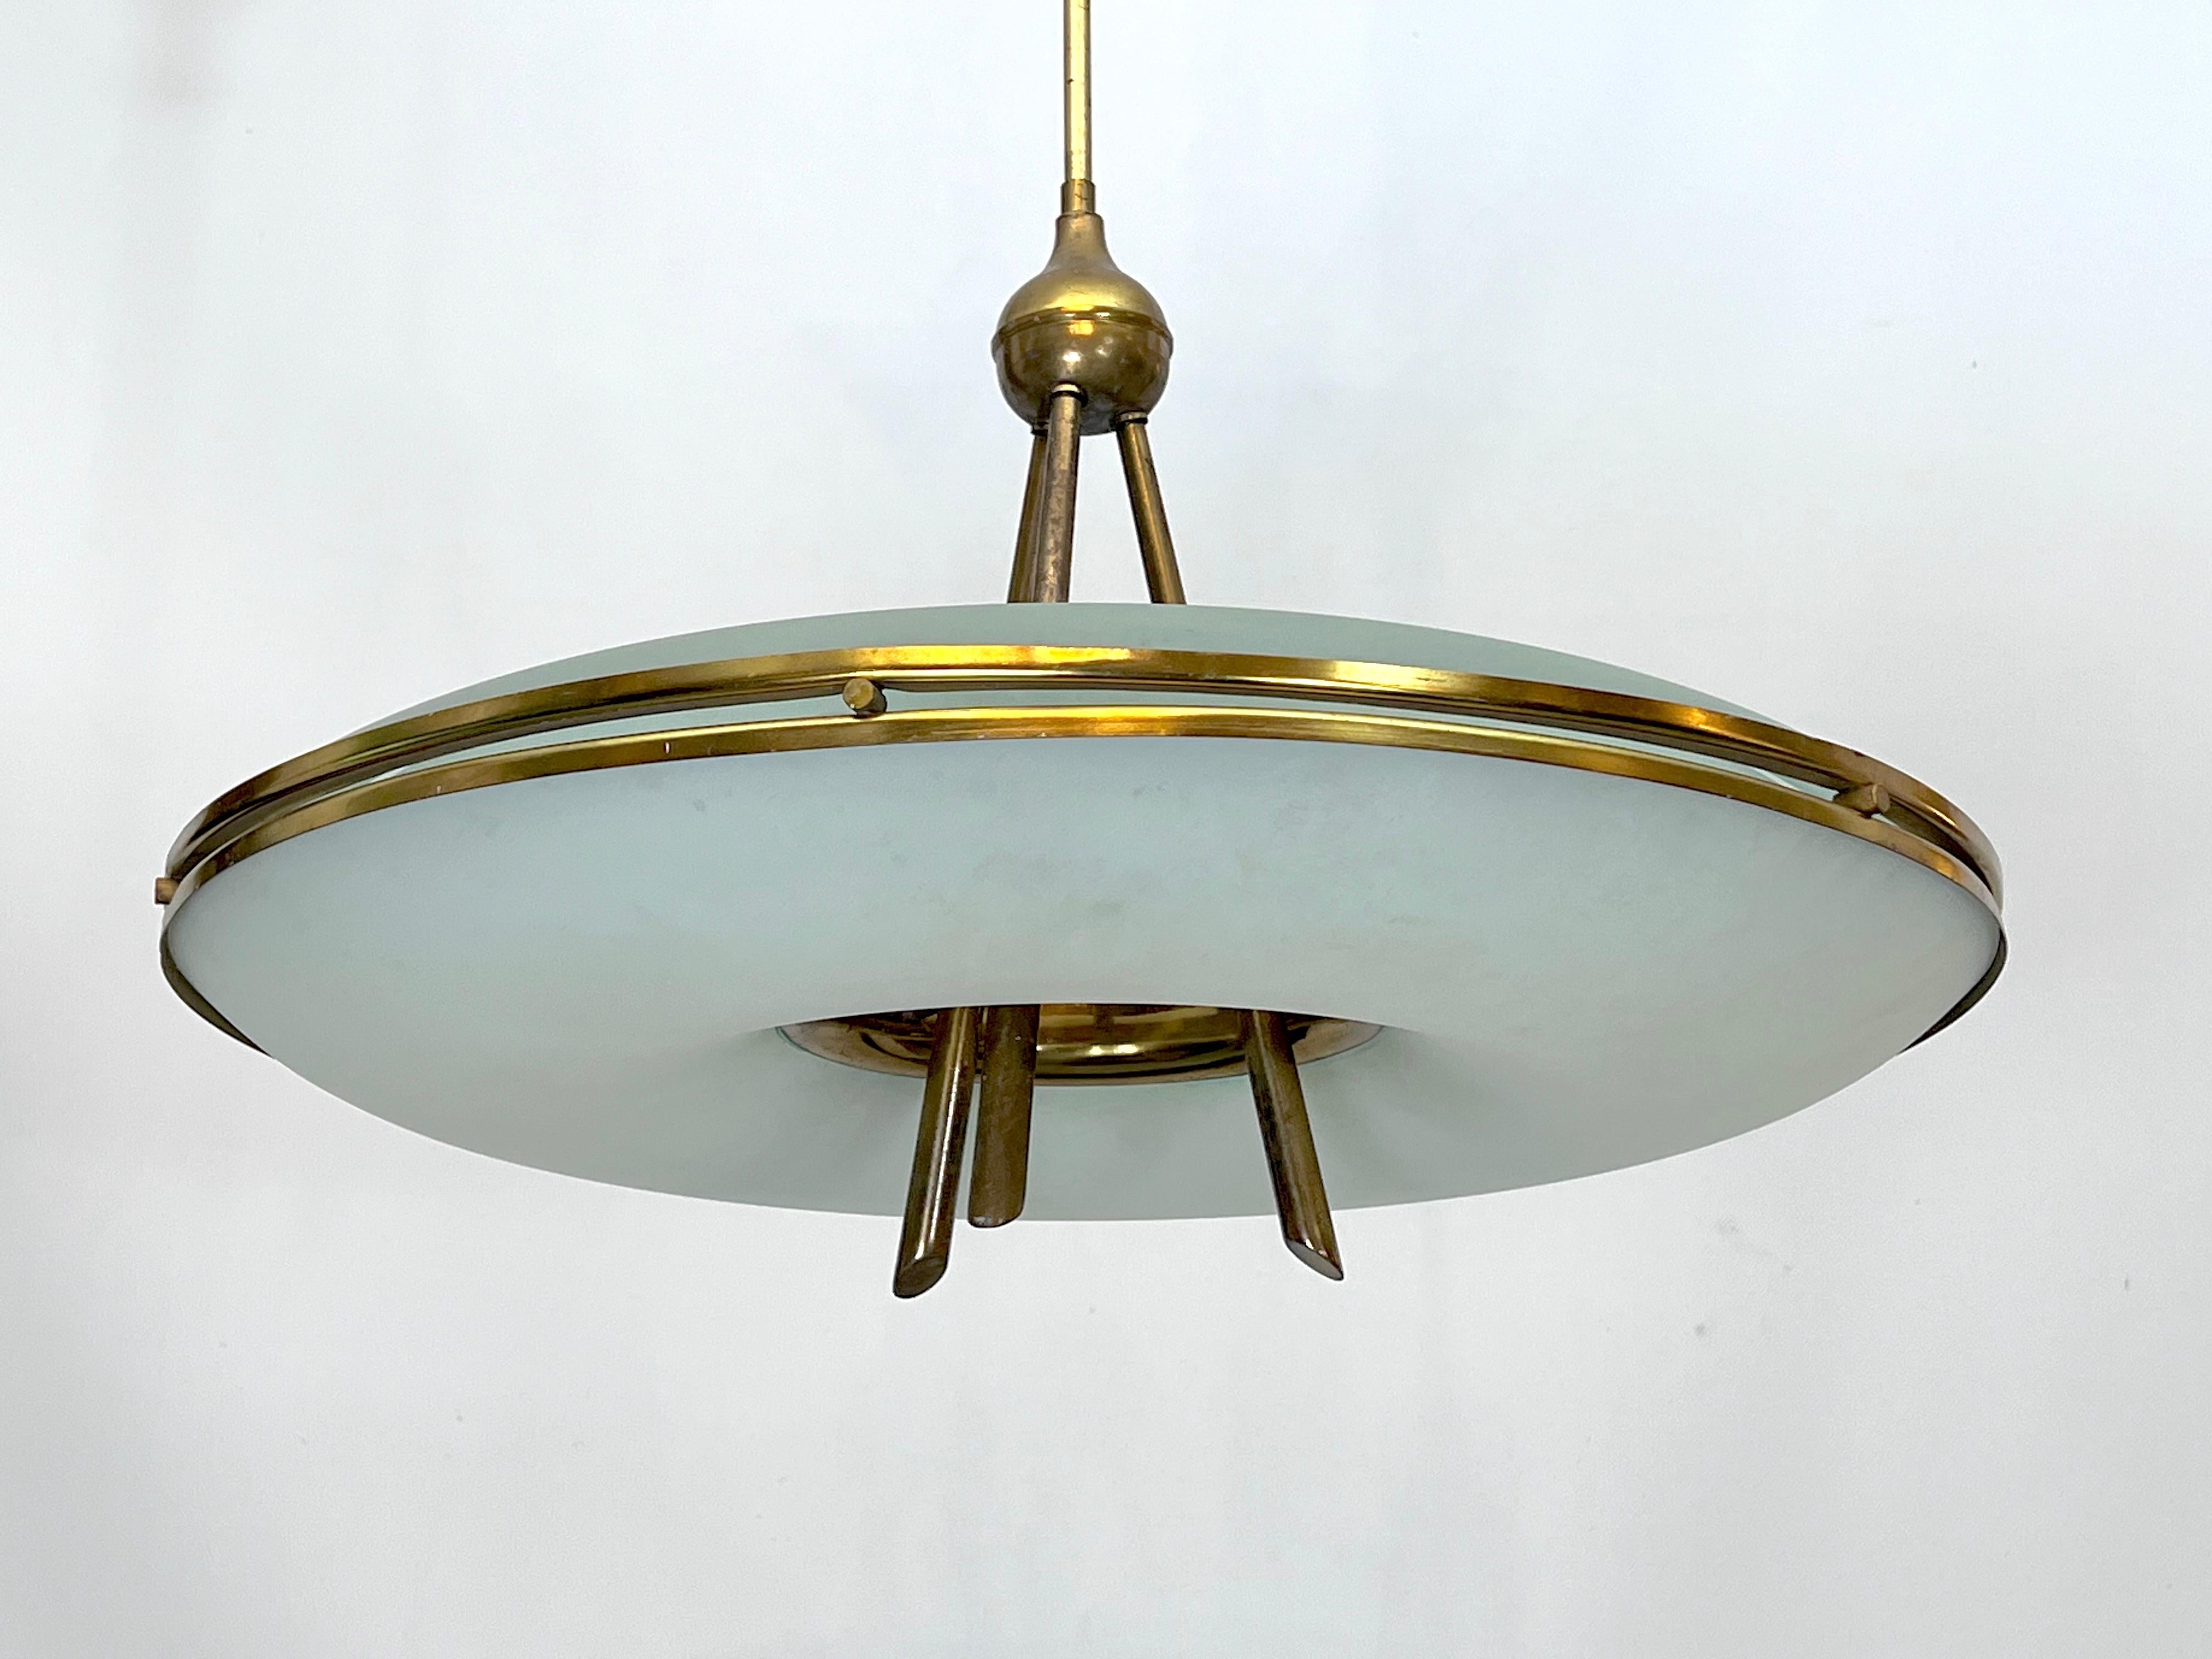 Produced in Italy during the 50s, this round chandelier with double curved satin glasses was designed in the style of Max Ingrand for Fontana Arte. It is in fair vintage condition with original patina and trace of age and use. No cracks or chips but